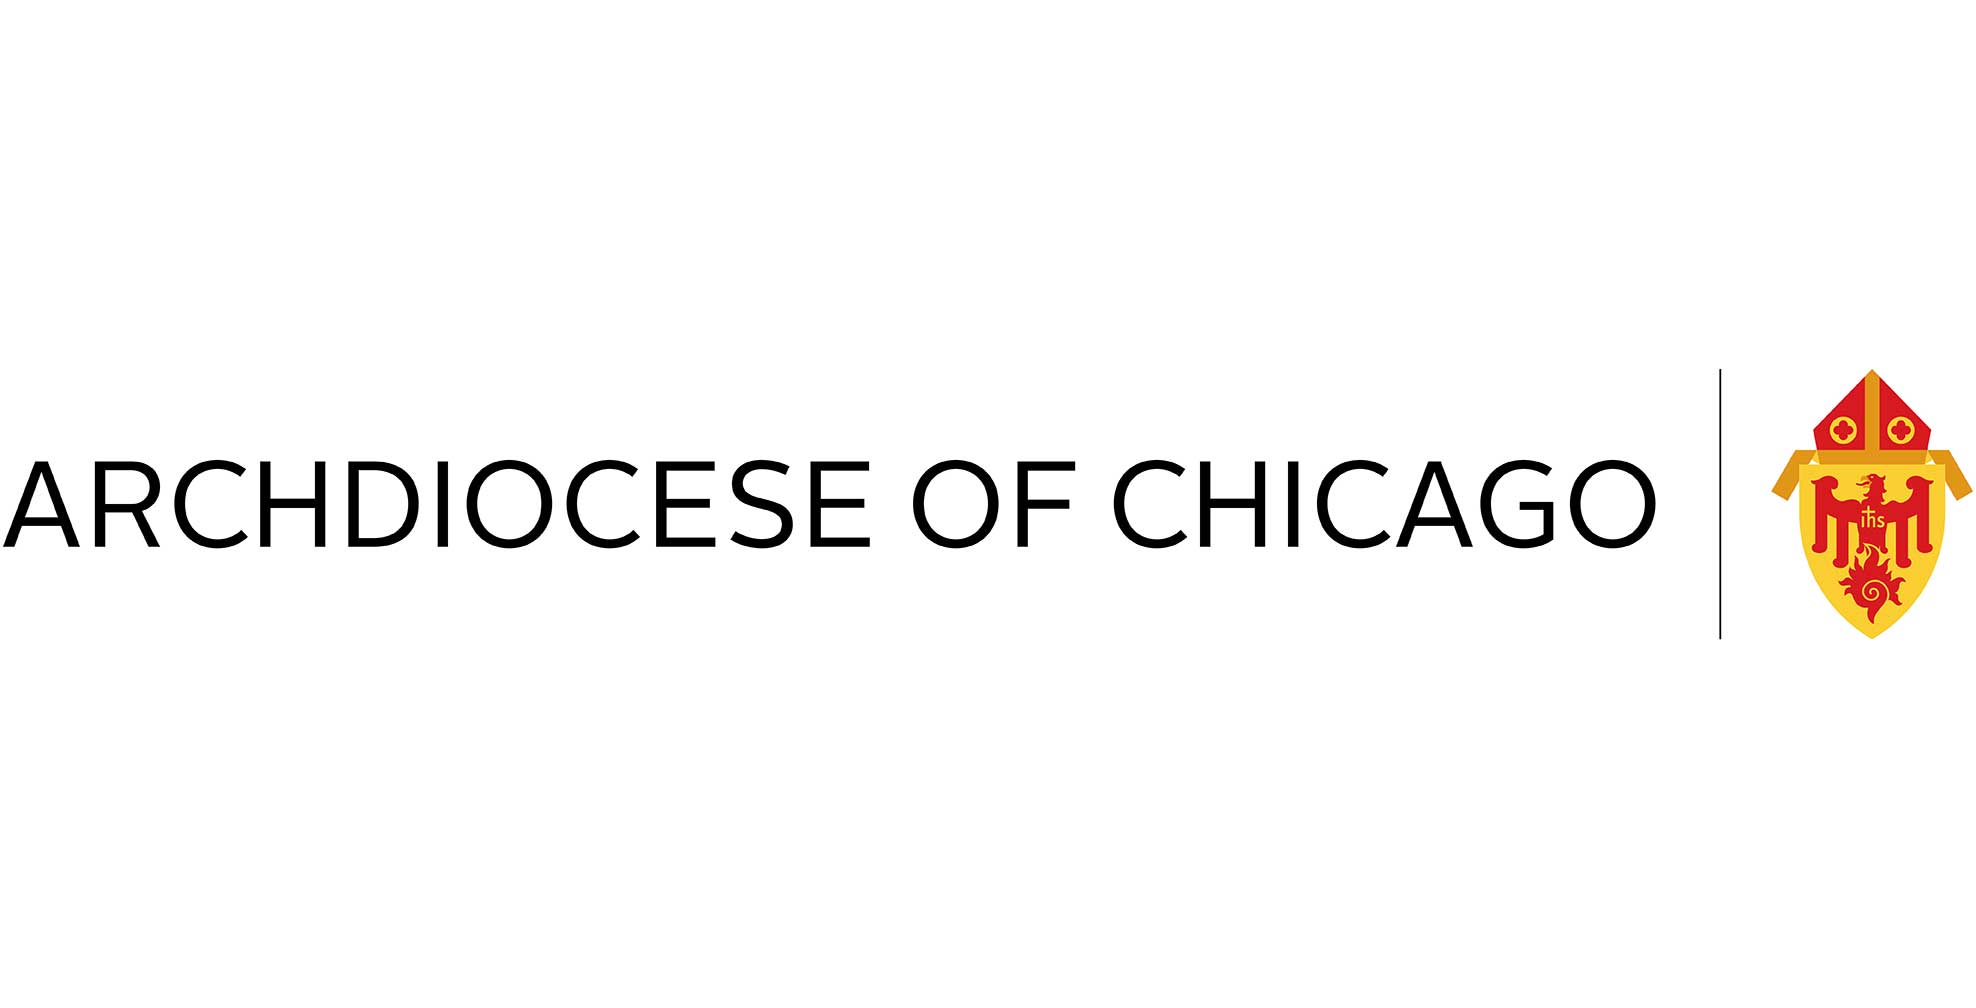 archdiocese-of-chicago-crosby-associates-chicago